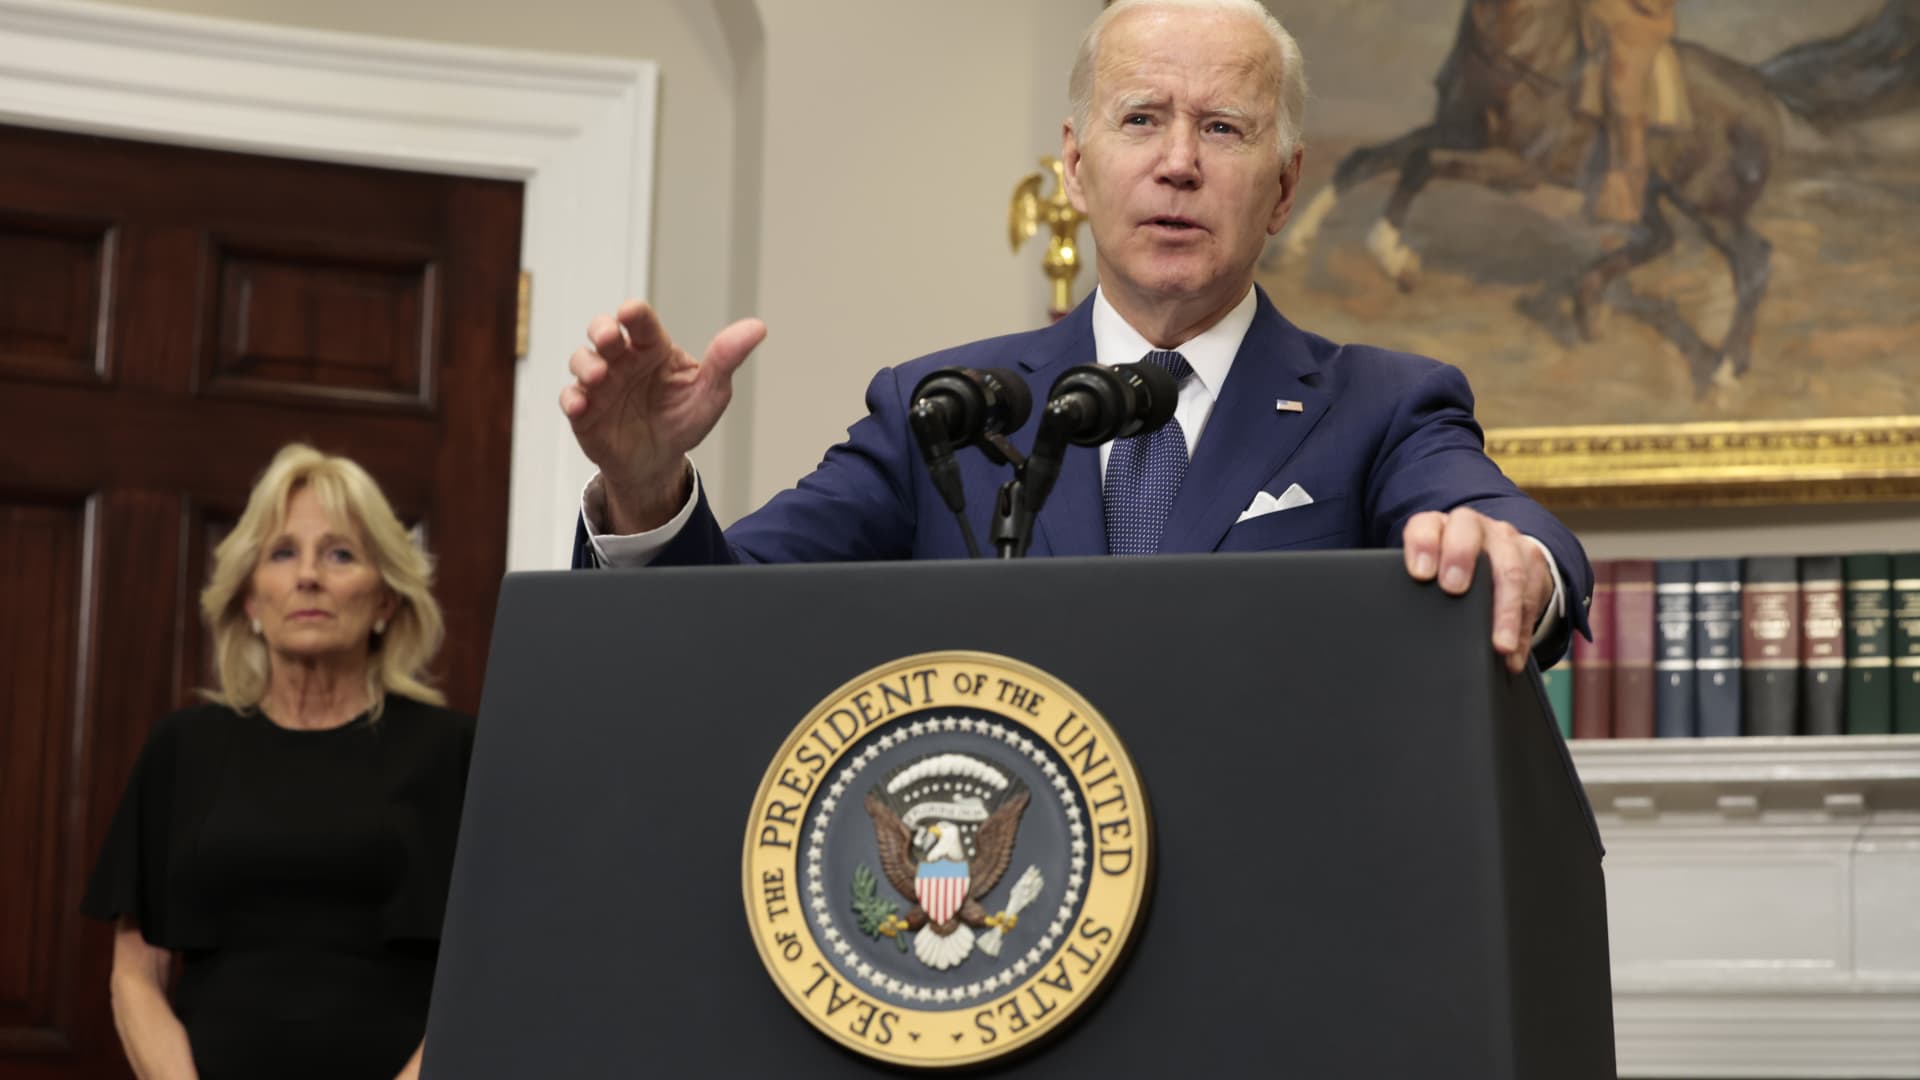 Biden to travel to Uvalde to mourn victims of Texas school shooting